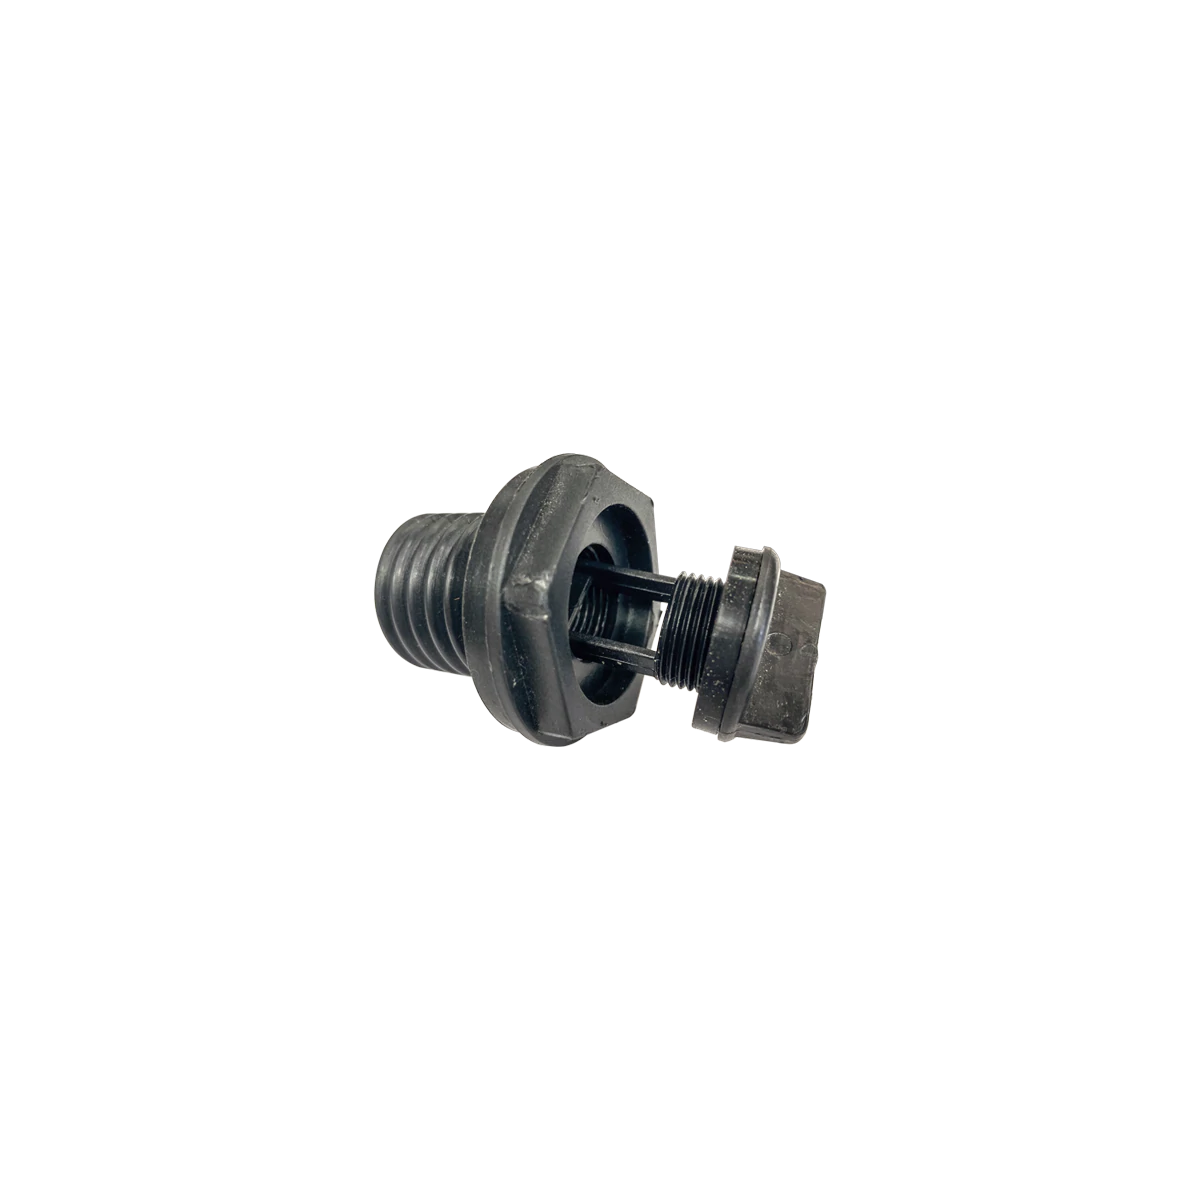 Featuring the Canyon Replacement Drain Plugs cooler, drain plugs manufactured by Canyon shown here from a third angle.